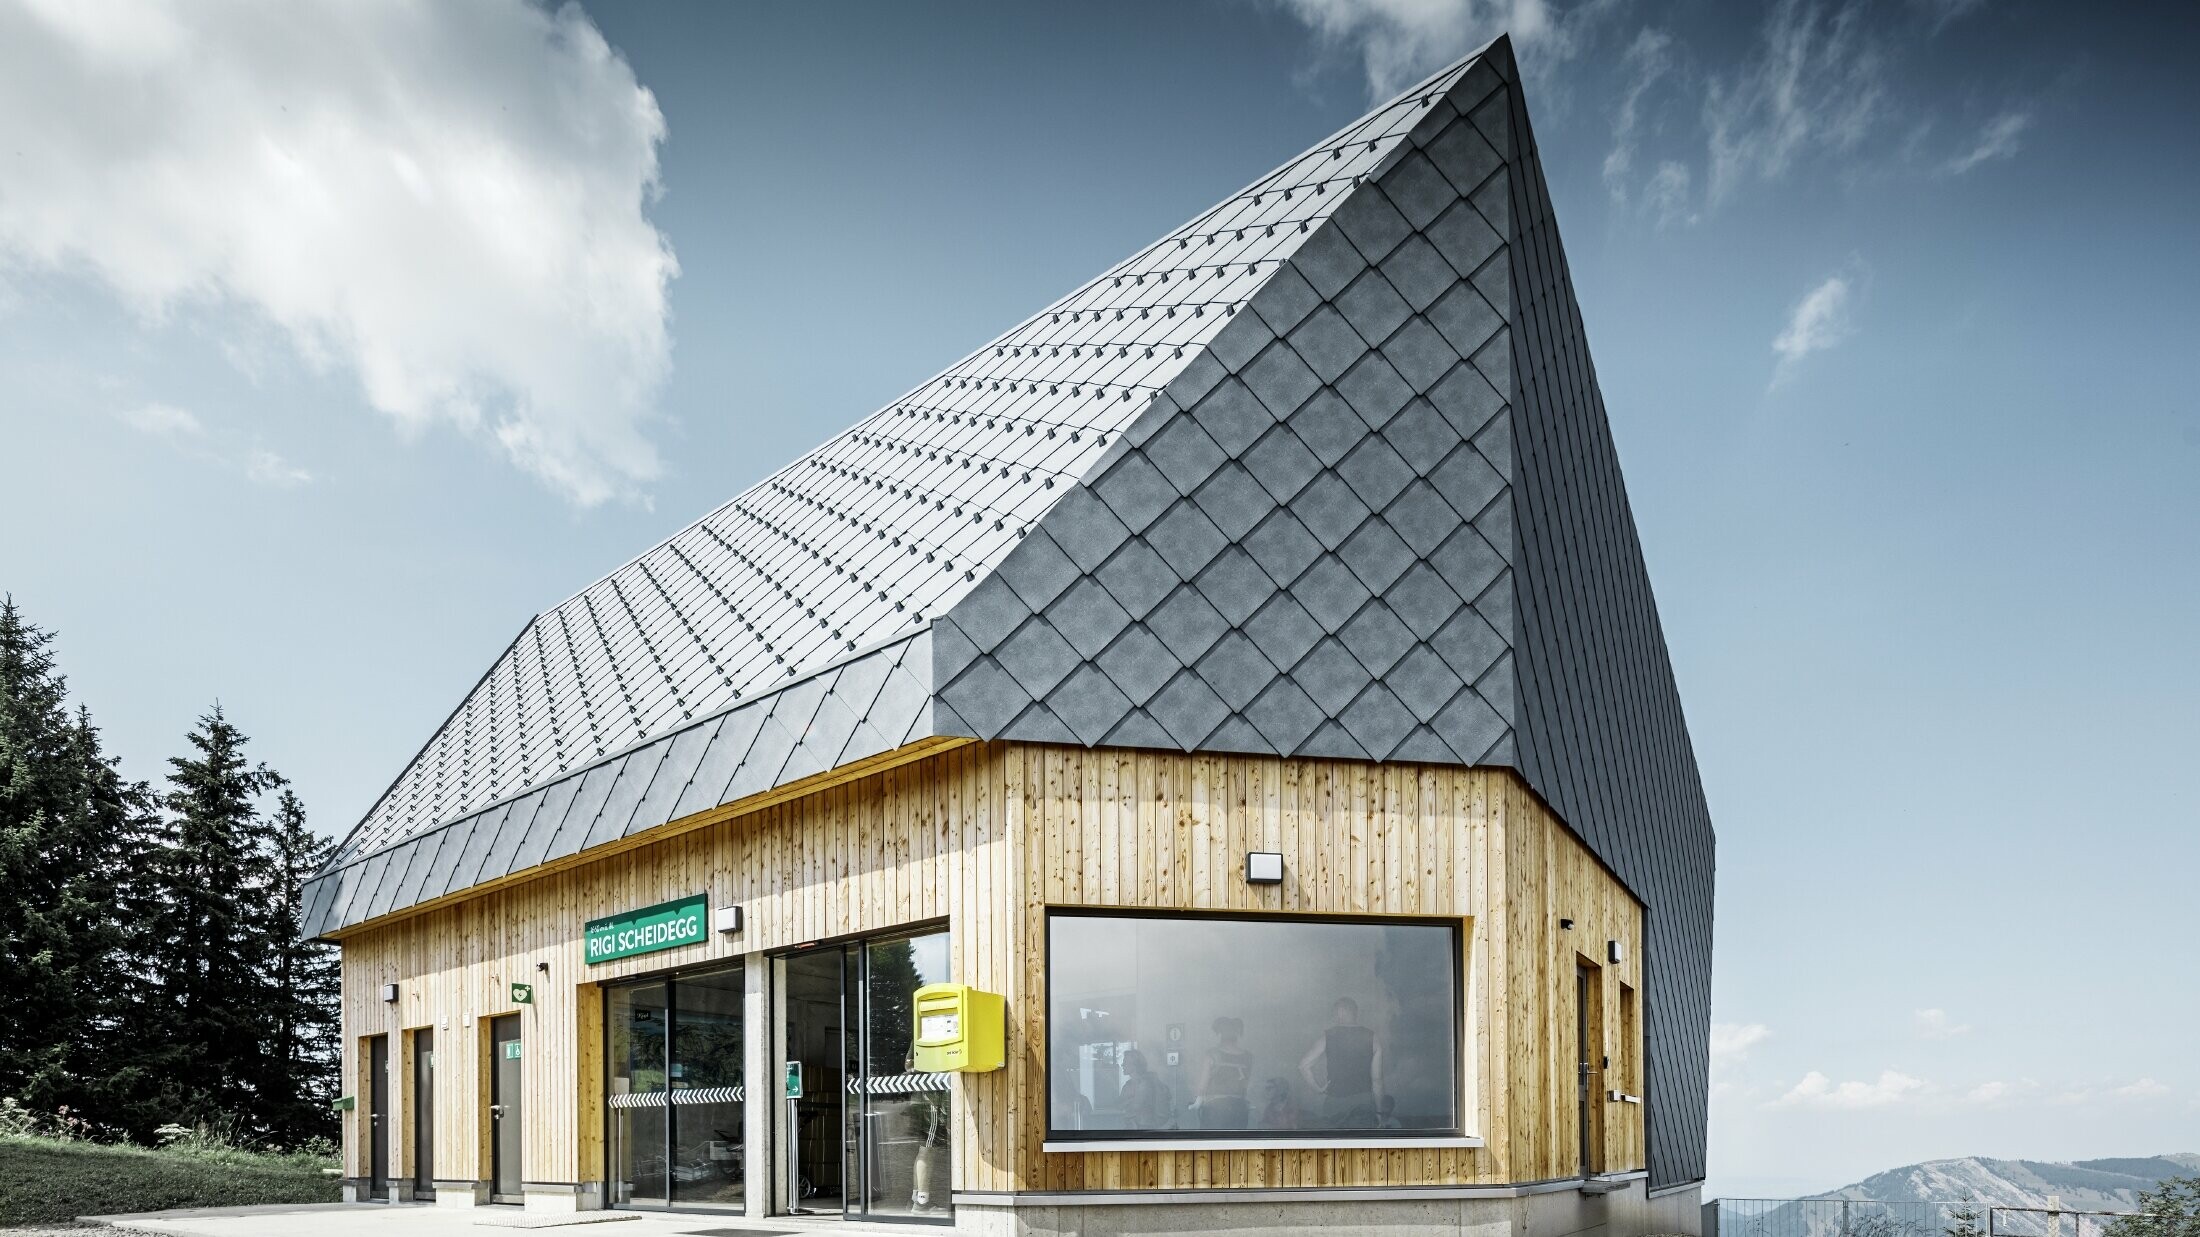 Rigi Railway Scheidegg mountain station in Goldau, Switzerland. The roof and part of the façade were covered with the 44 x 44 rhomboid roof and façade tile in P.10 stone grey.